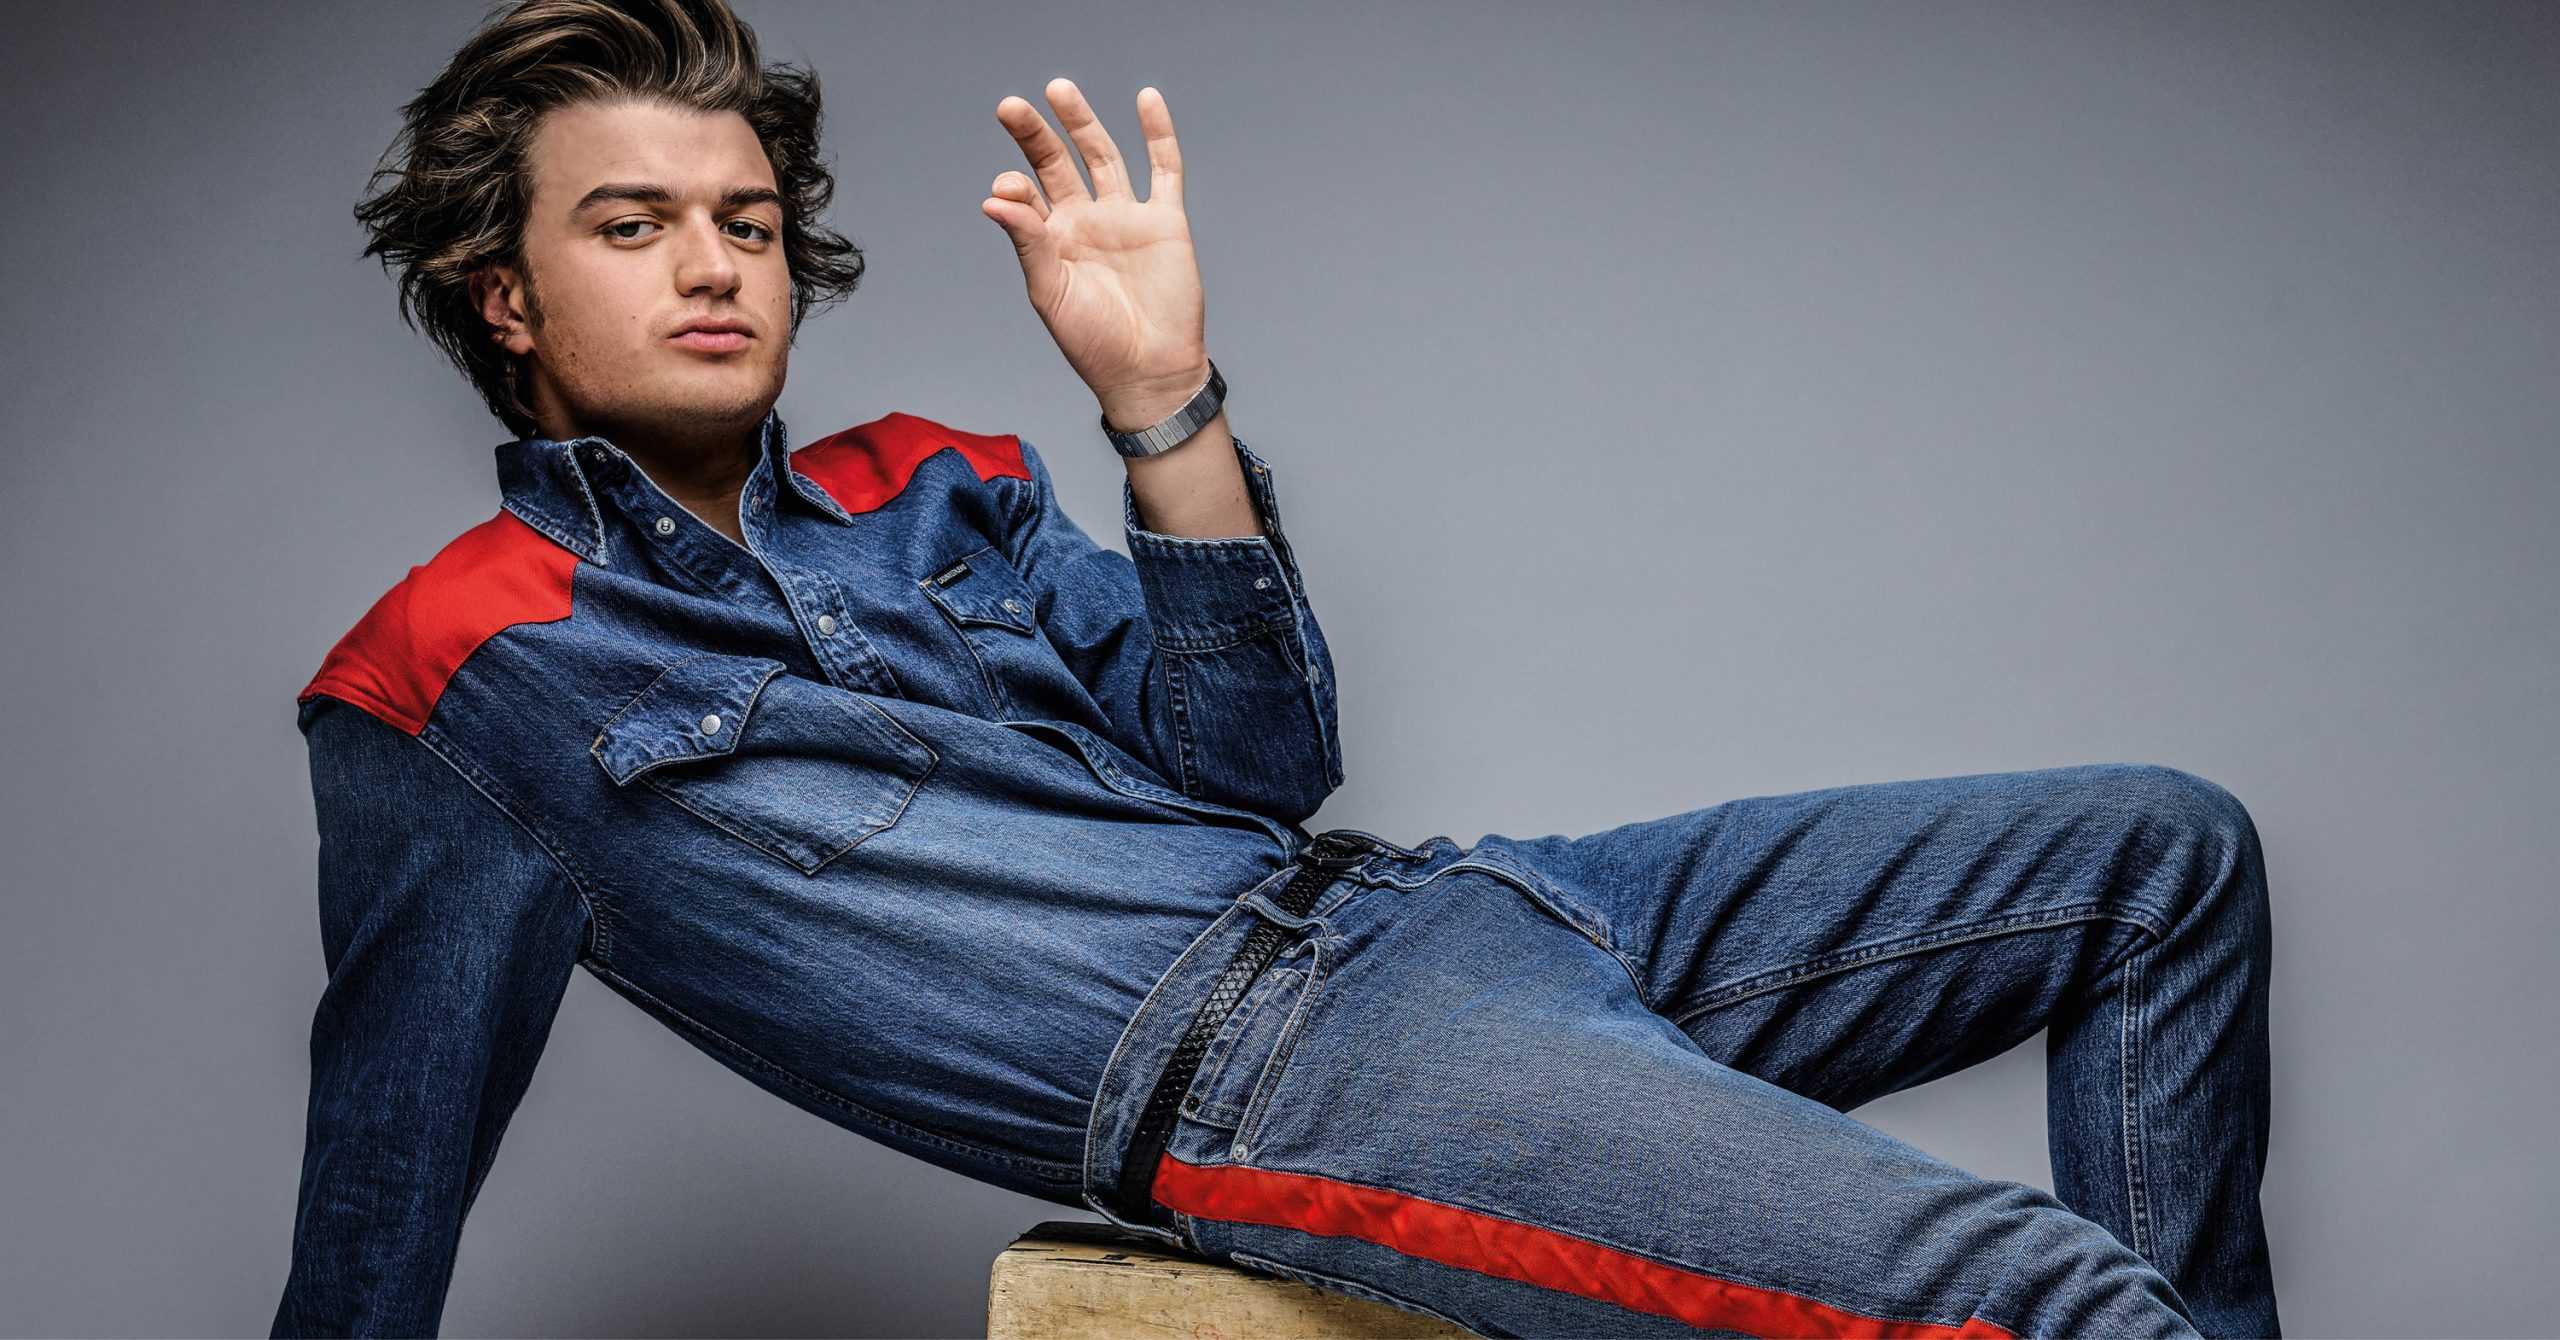 "It’s Unparalleled": Joe Keery on the thrills of practical effects in 'Stranger Things 4'